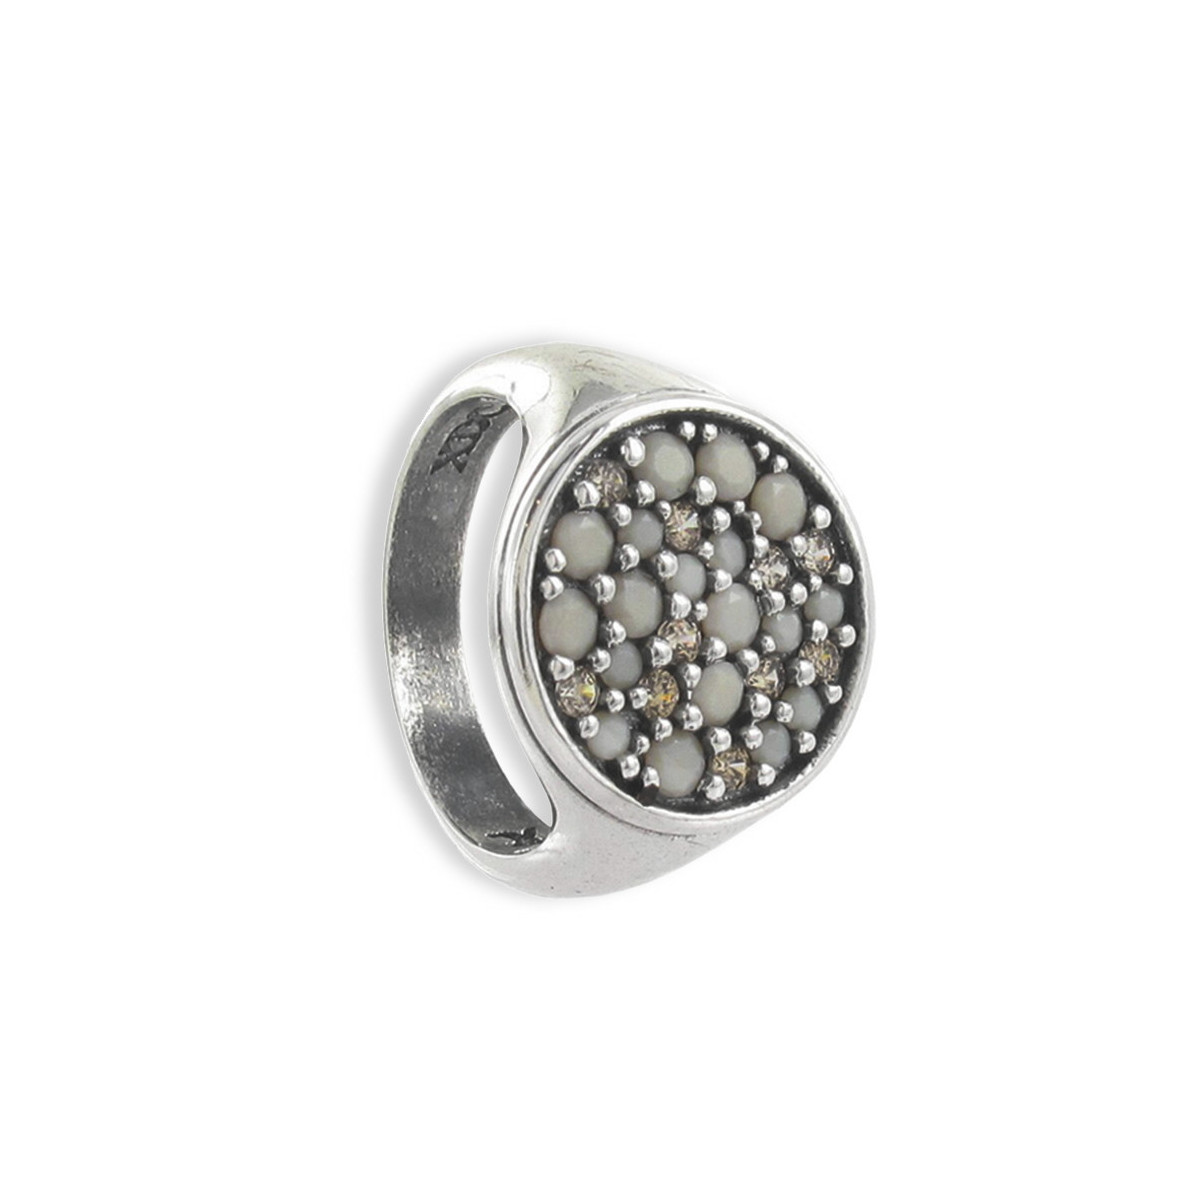 SILVER STAMP WITH NATURAL STONES